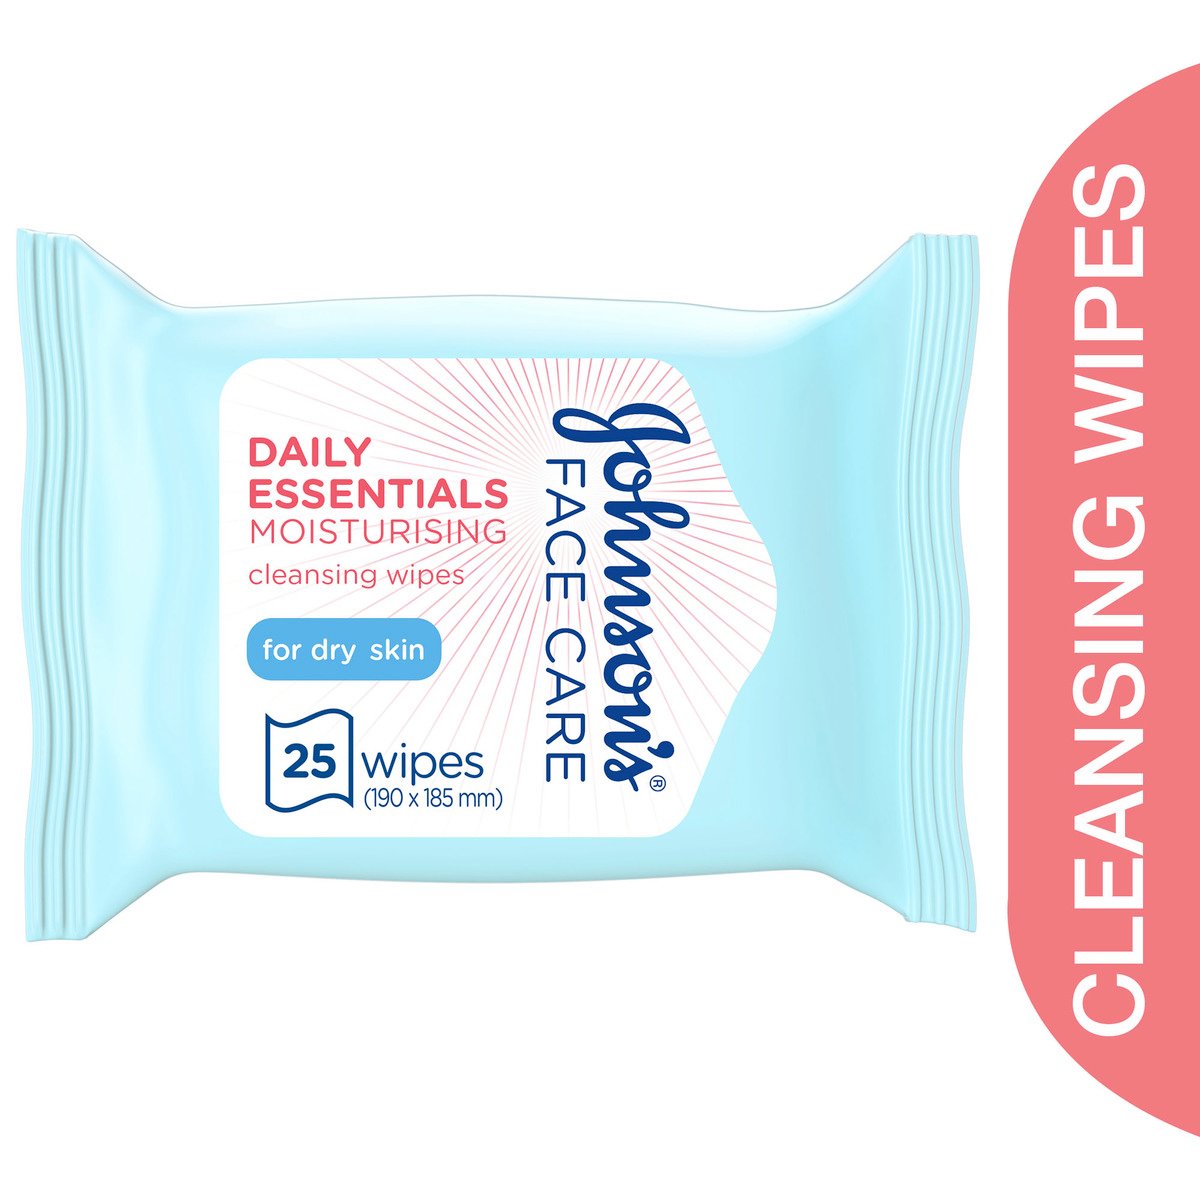 Johnson's Cleansing Wipes Daily Essentials Moisturising Dry Skin 25 pcs